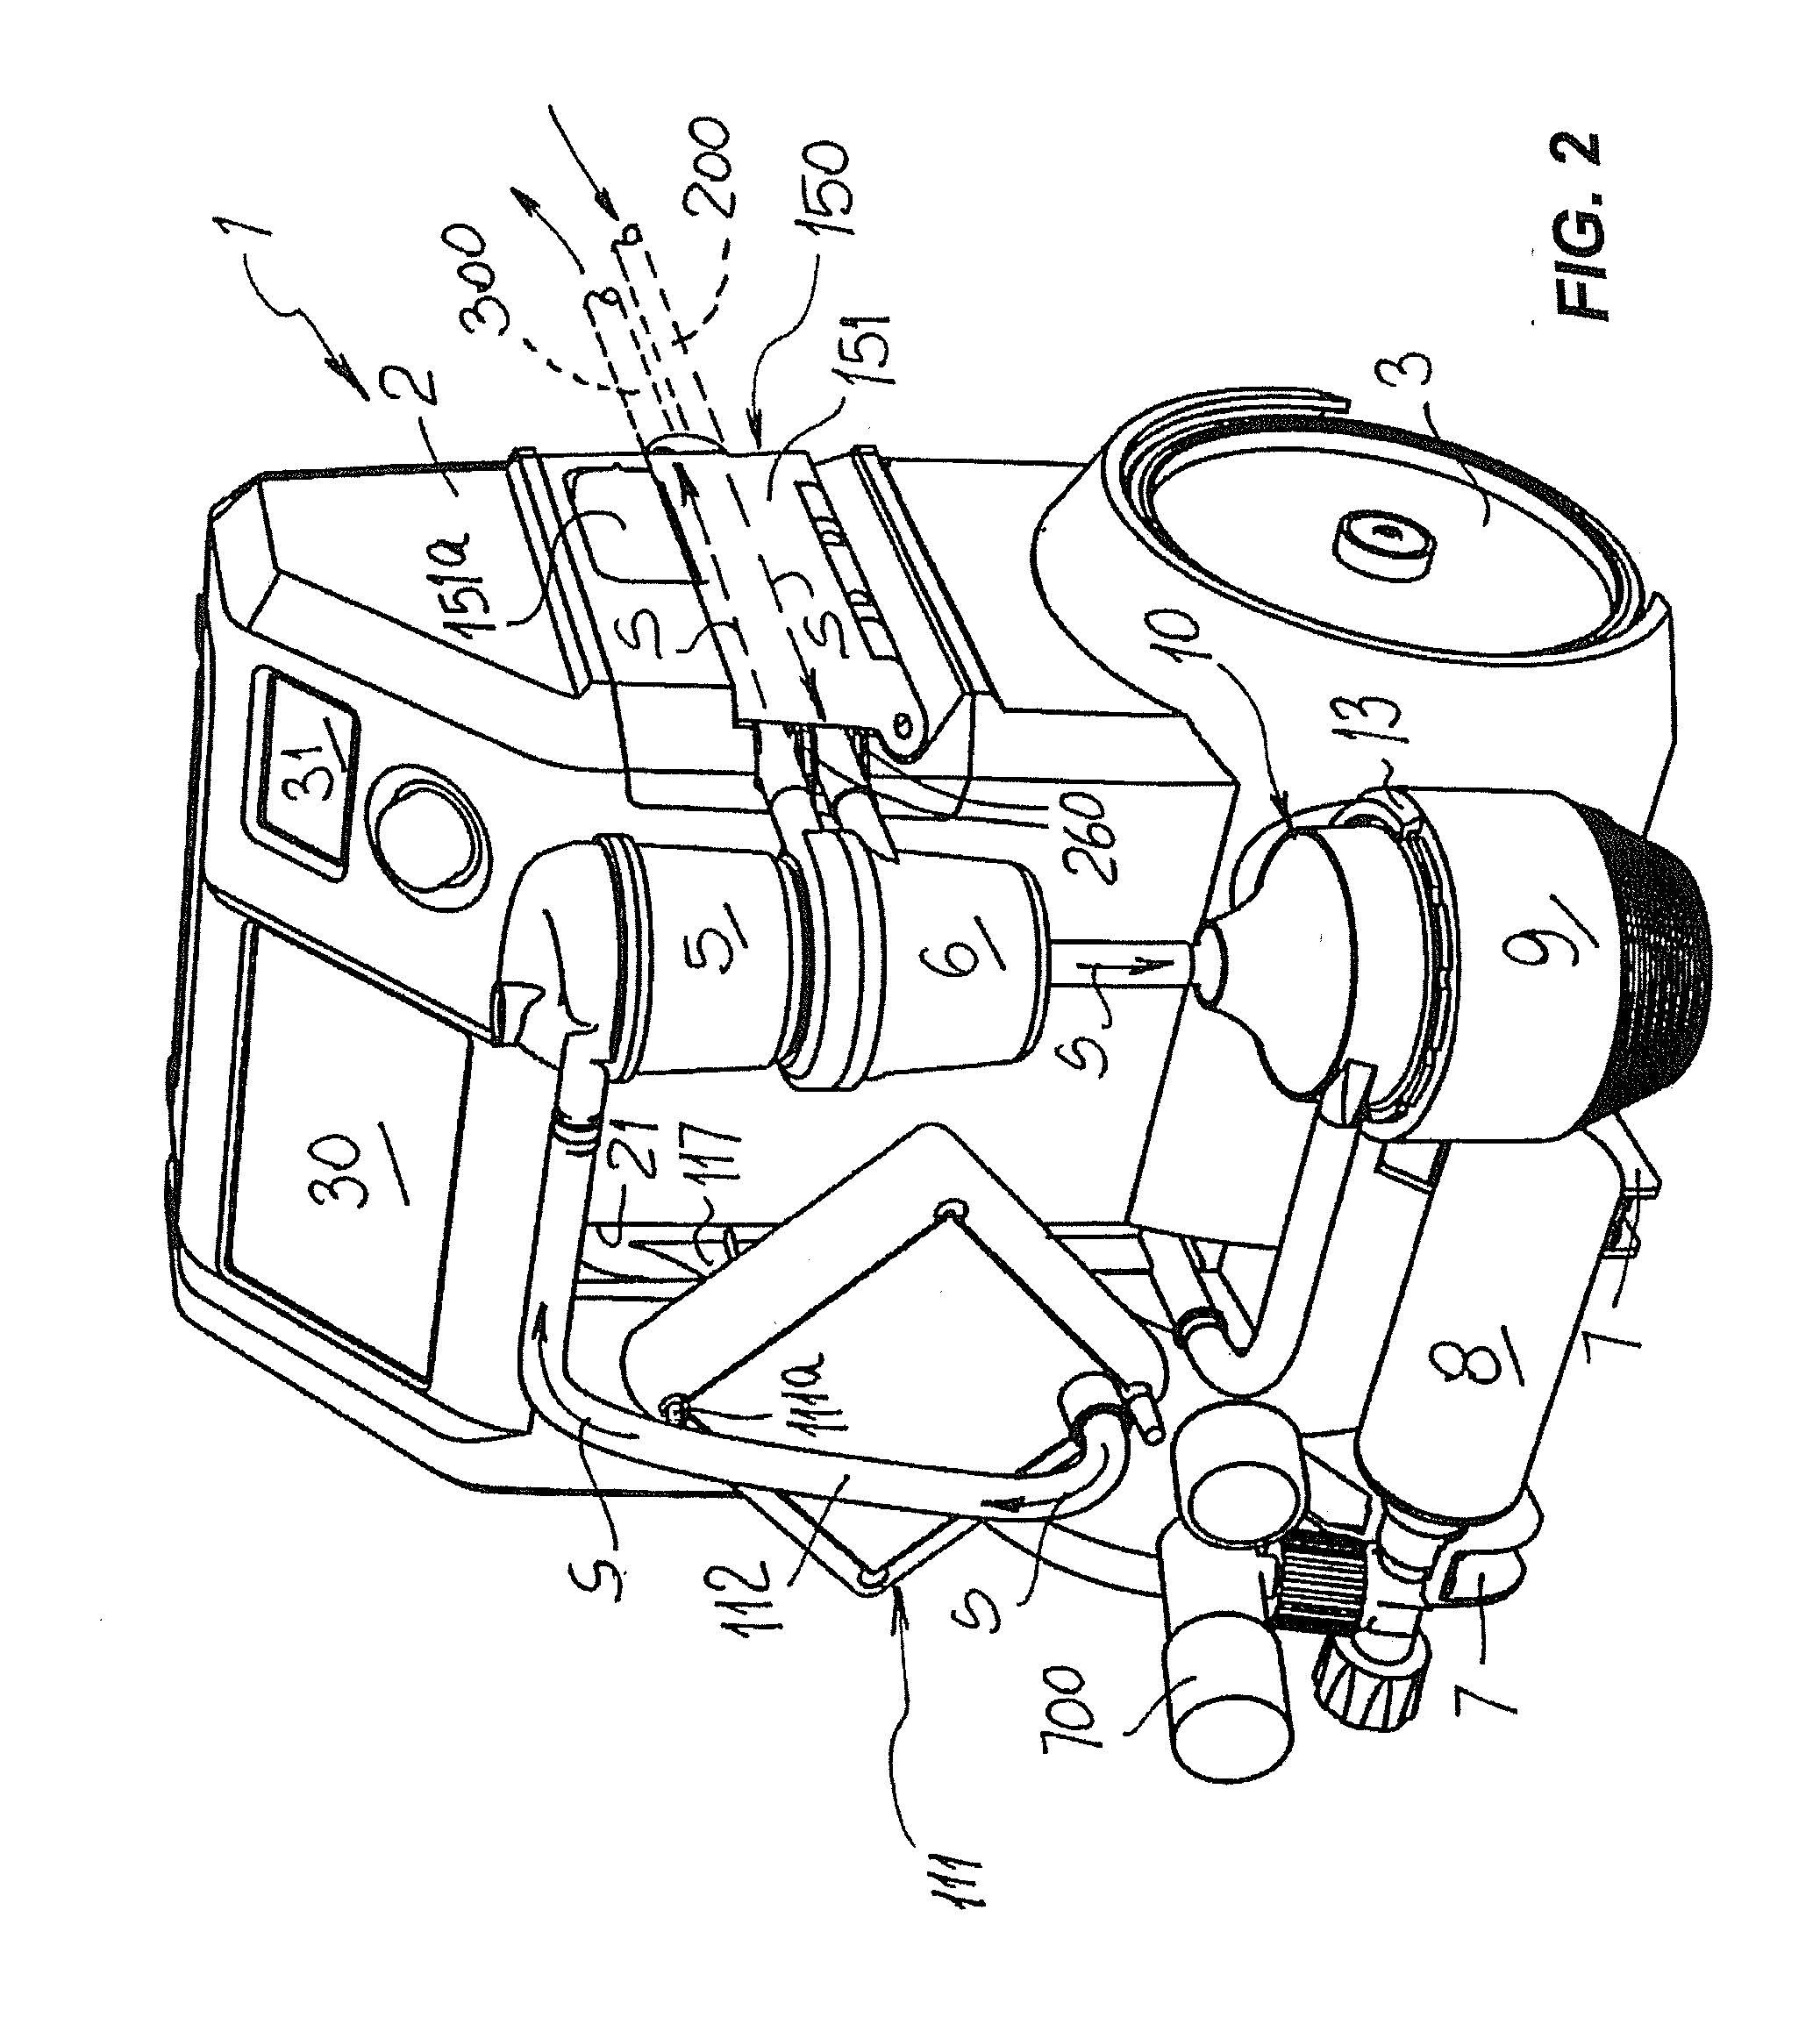 Portable medical apparatus for cardiopulmonary aid to patients